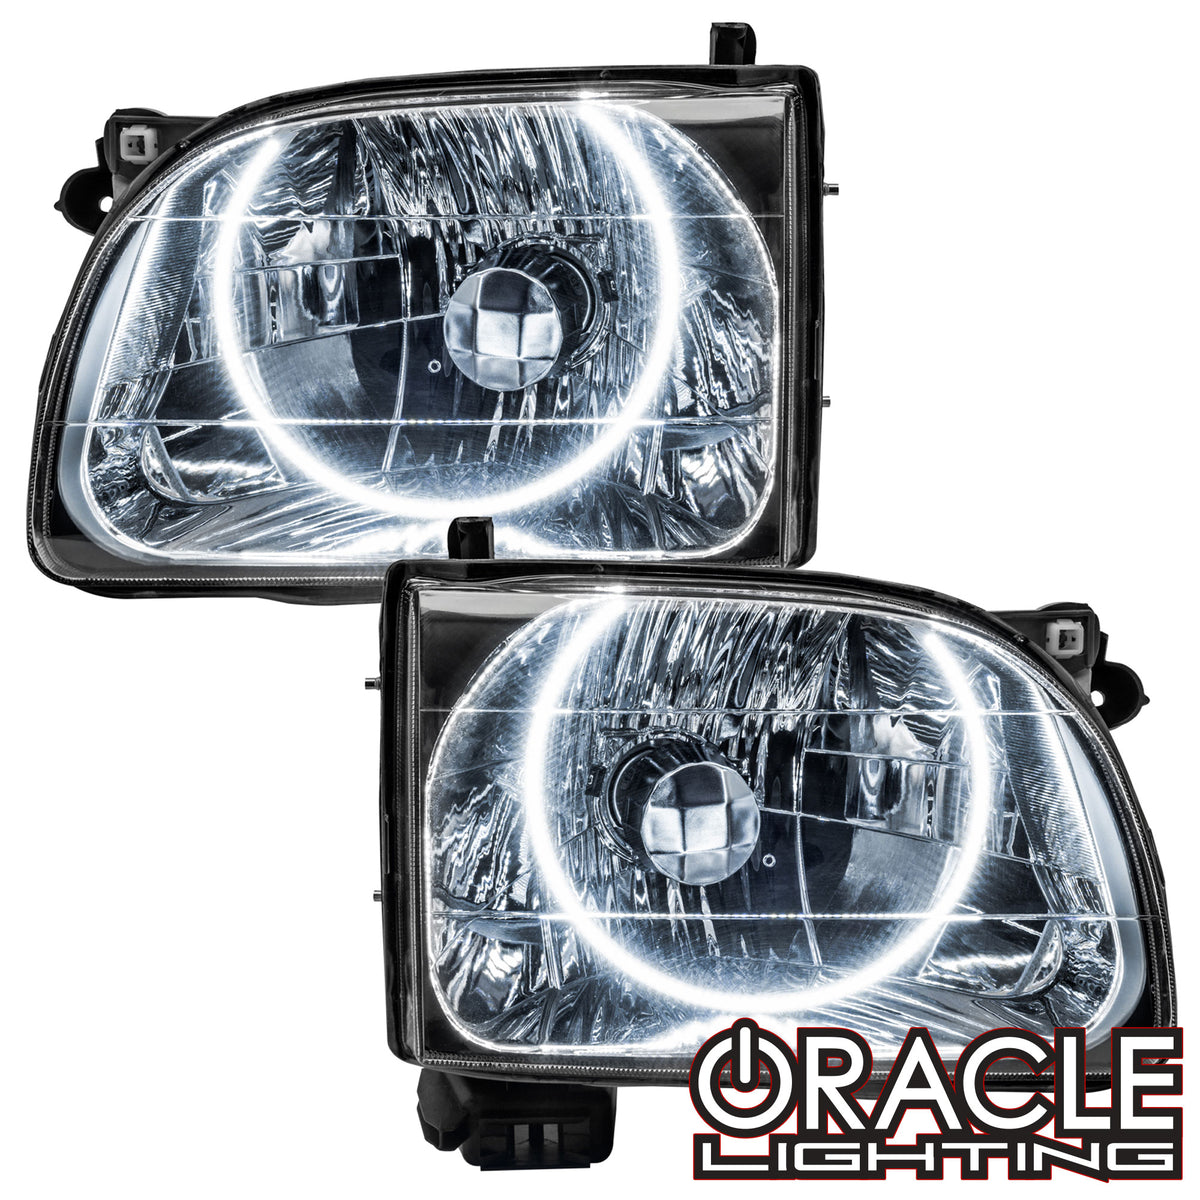 ORACLE Lighting 2001-2004 Toyota Tacoma Pre-Assembled Halo